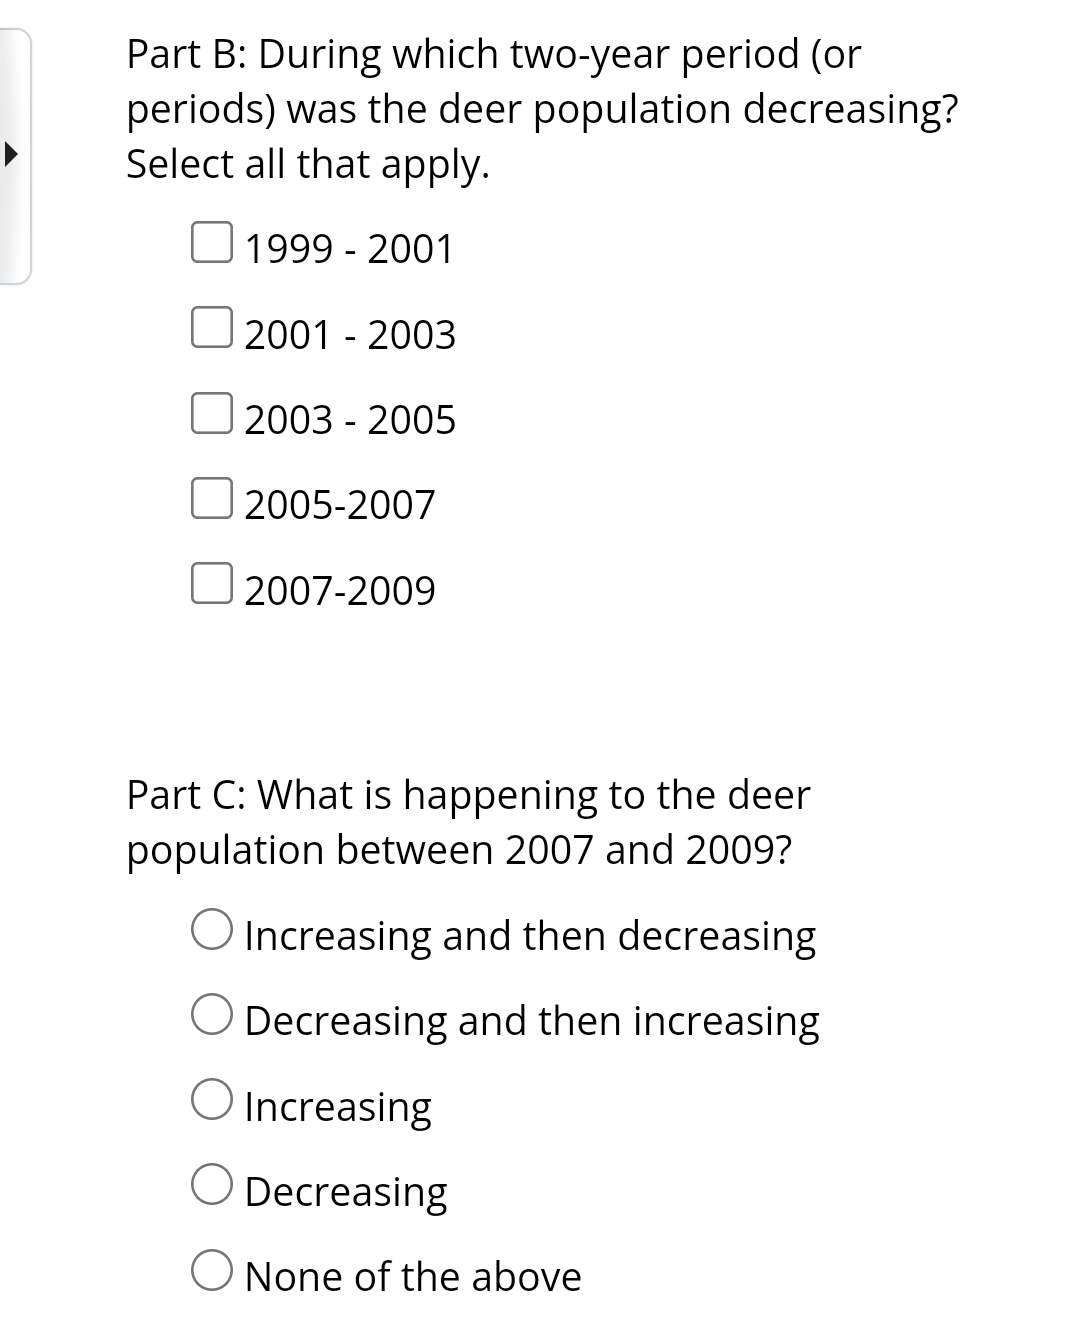 Part B: During which two-year period (or
periods) was the deer population decreasing?
Select all that apply.
1999 - 2001
2001 - 2003
O
2003 - 2005
2005-2007
2007-2009
Part C: What is happening to the deer
population between 2007 and 2009?
O Increasing and then decreasing
Decreasing and then increasing
Increasing
Decreasing
O None of the above